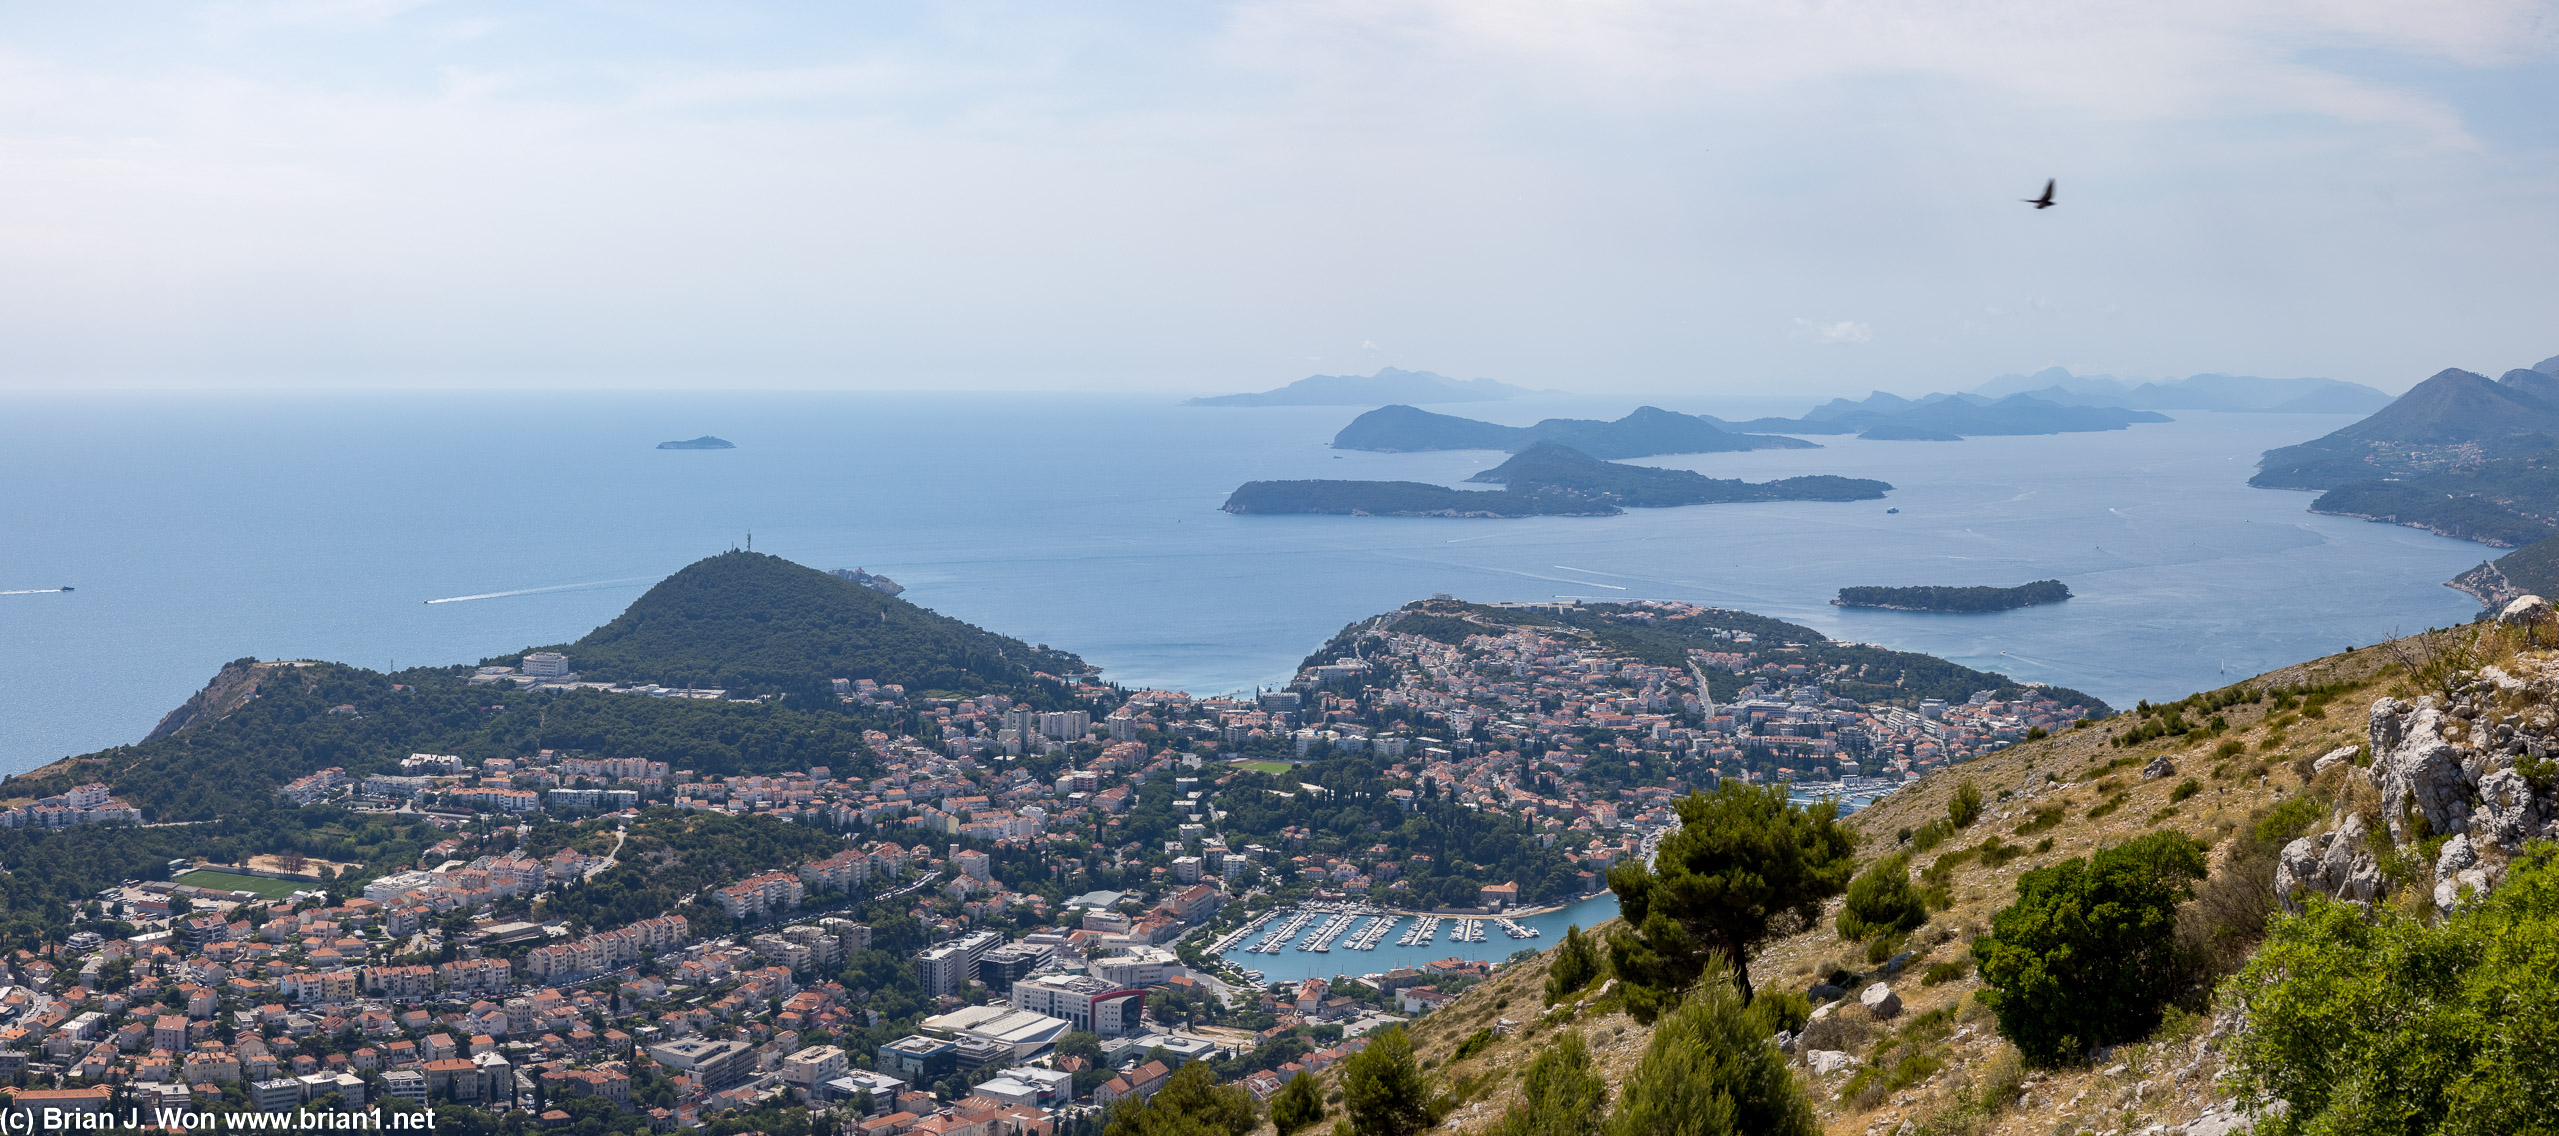 From the top of Mt. Srd, towards modern Dubrovnik.